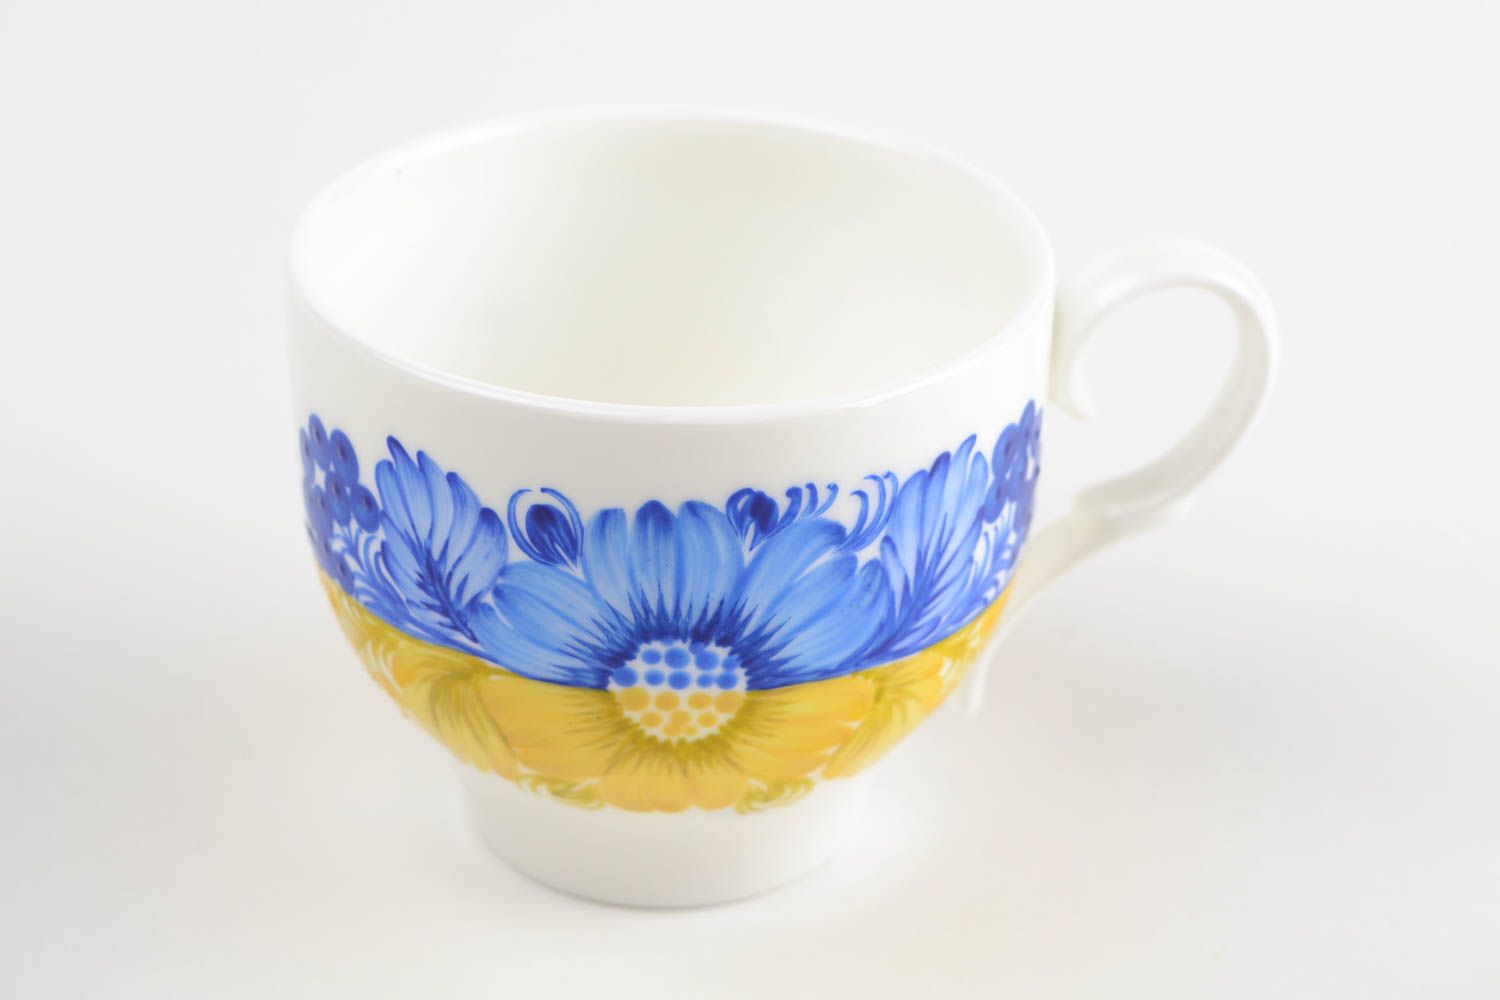 Porcelain teacup in white, yellow, and blue color with handle photo 3